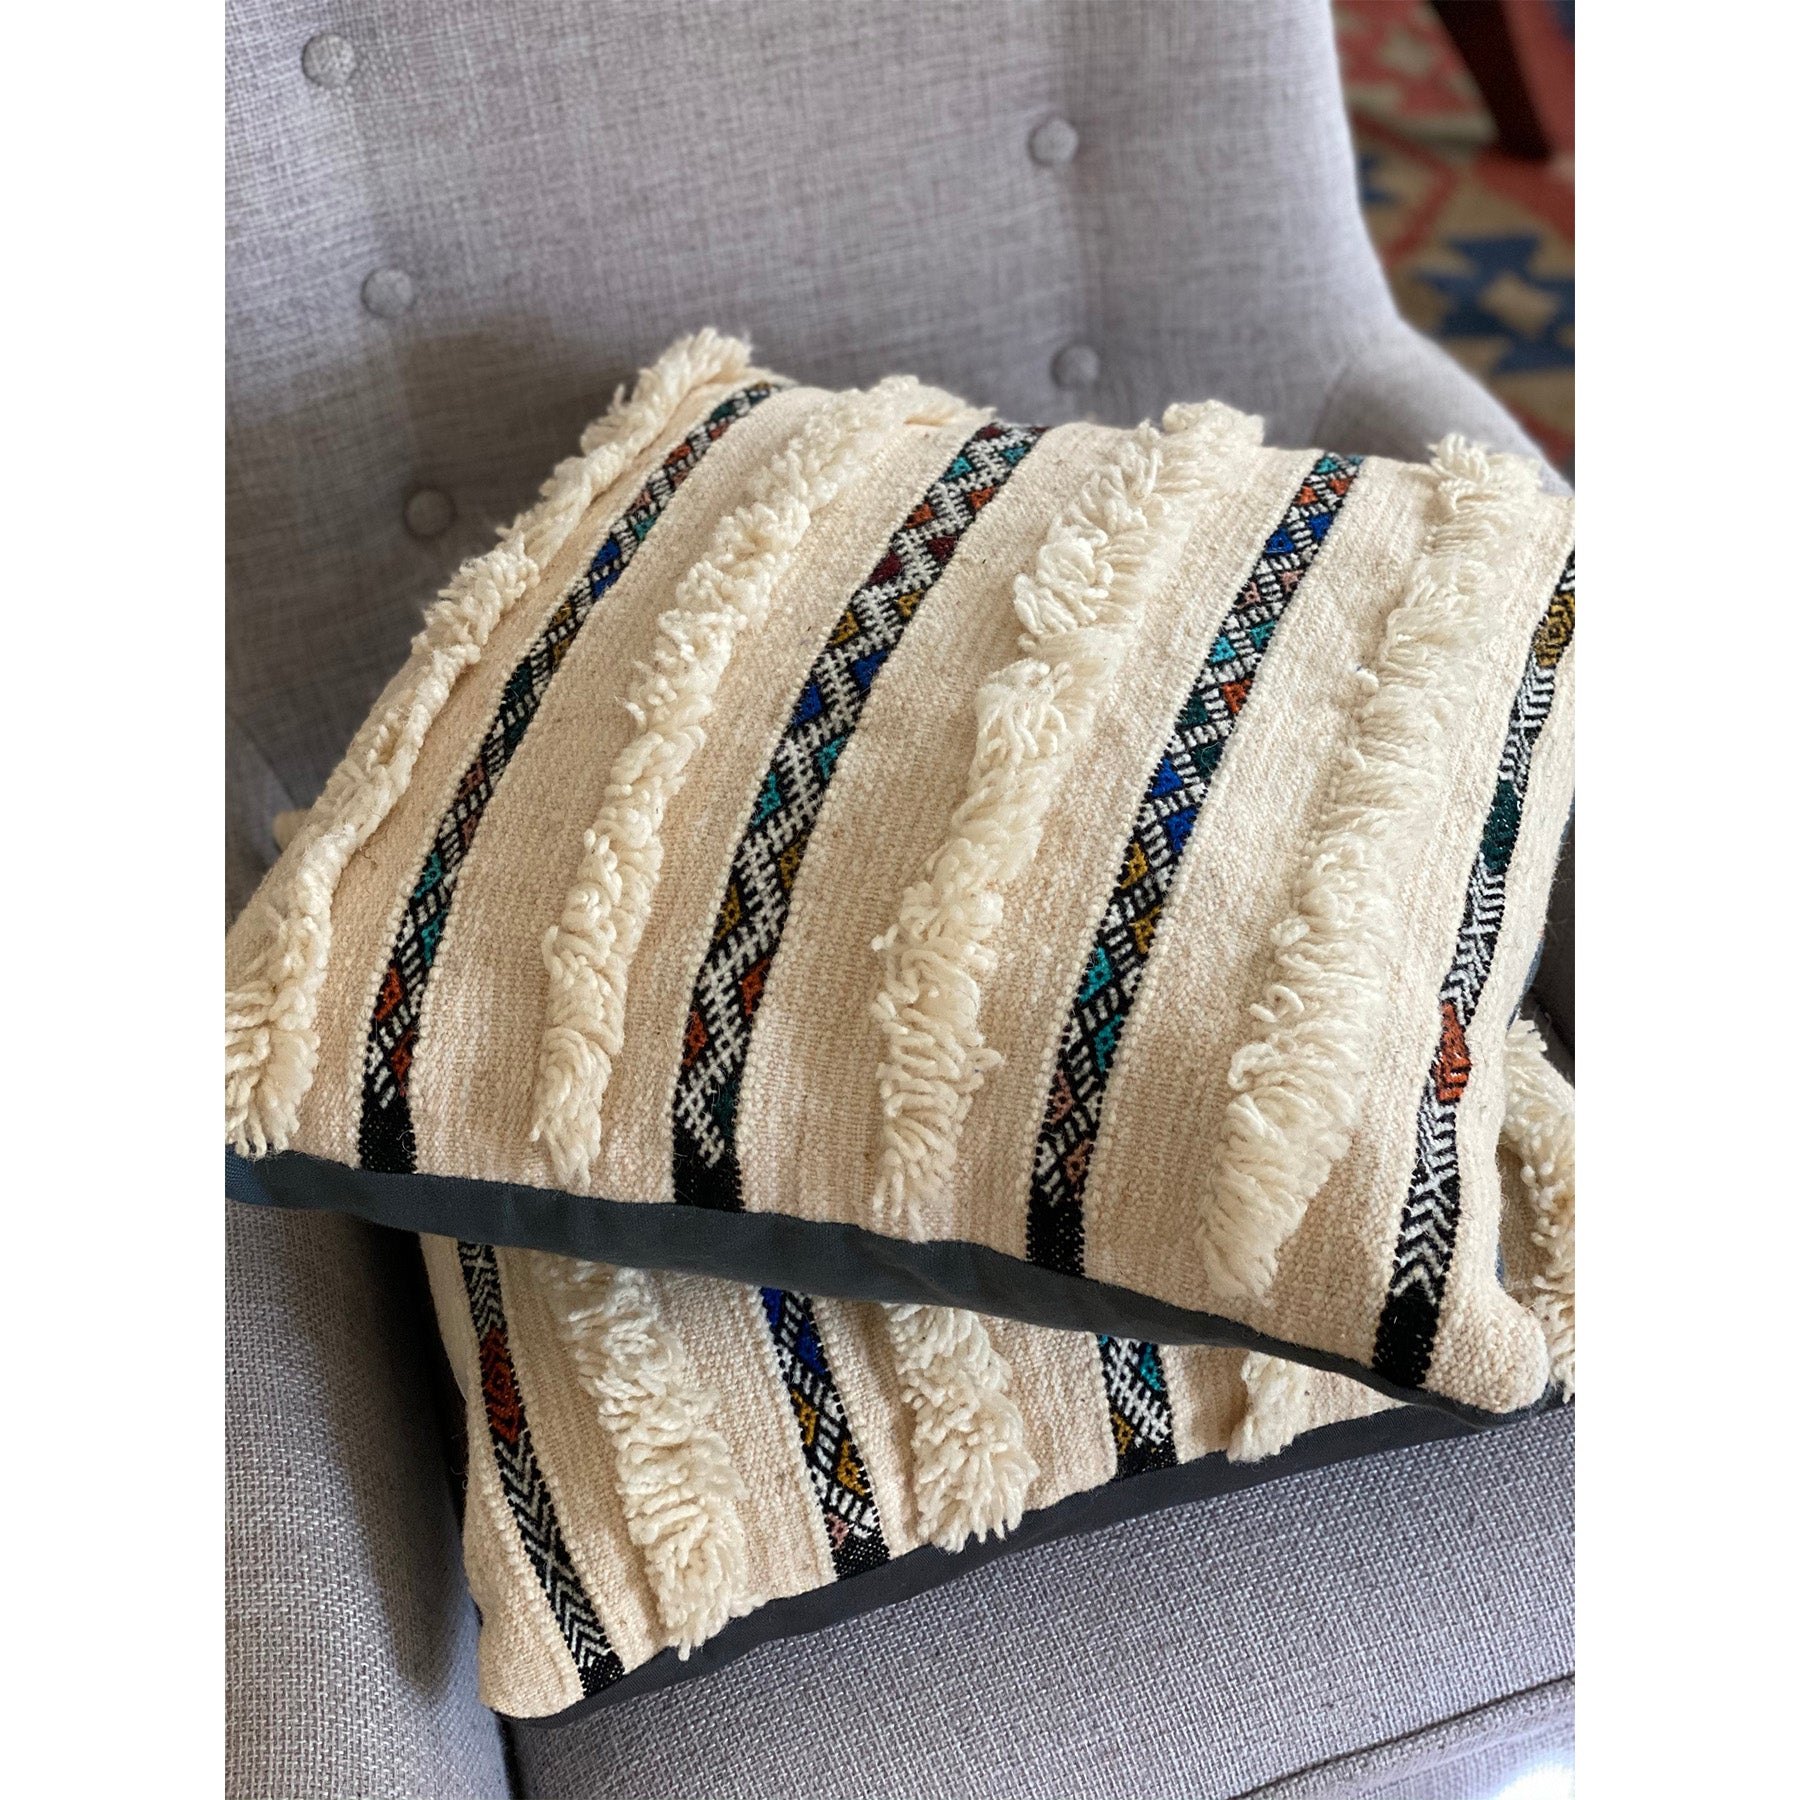 Stack of two colorful wedding blanket pillows in Los Angeles showroom,  made by Kantara artisans